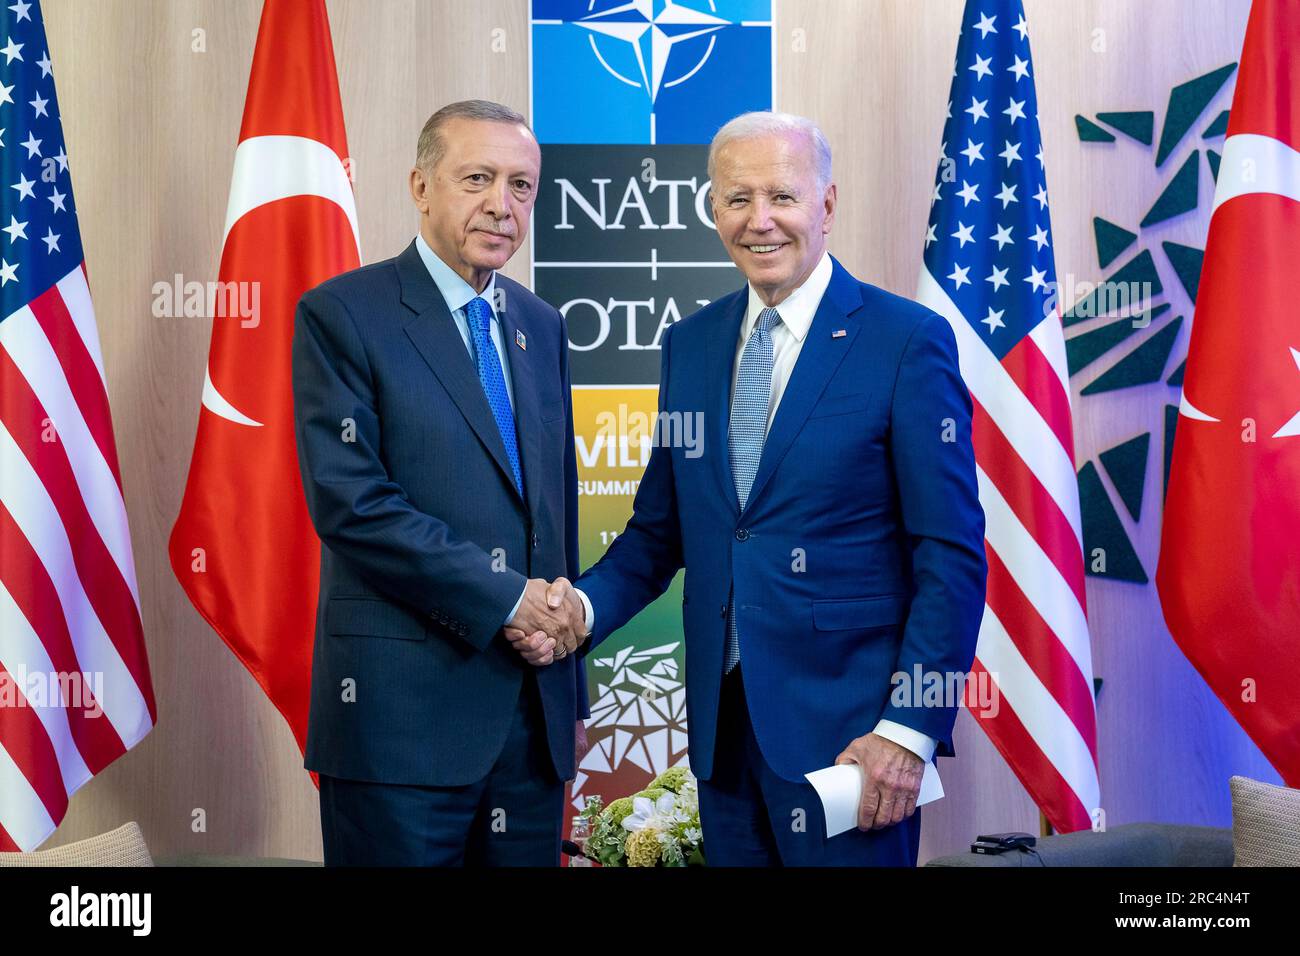 Vilnius, Lithuania. 11th July, 2023. U.S President Joe Biden, right, shakes hands with Turkish President Recep Tayyip Erdogan, left, before a bilateral meeting on the sidelines of the NATO Summit at the Lithuanian Exhibition and Congress Center, July 11, 2023 in Vilnius, Lithuania. Credit: Adam Schultz/White House Photo/Alamy Live News Stock Photo